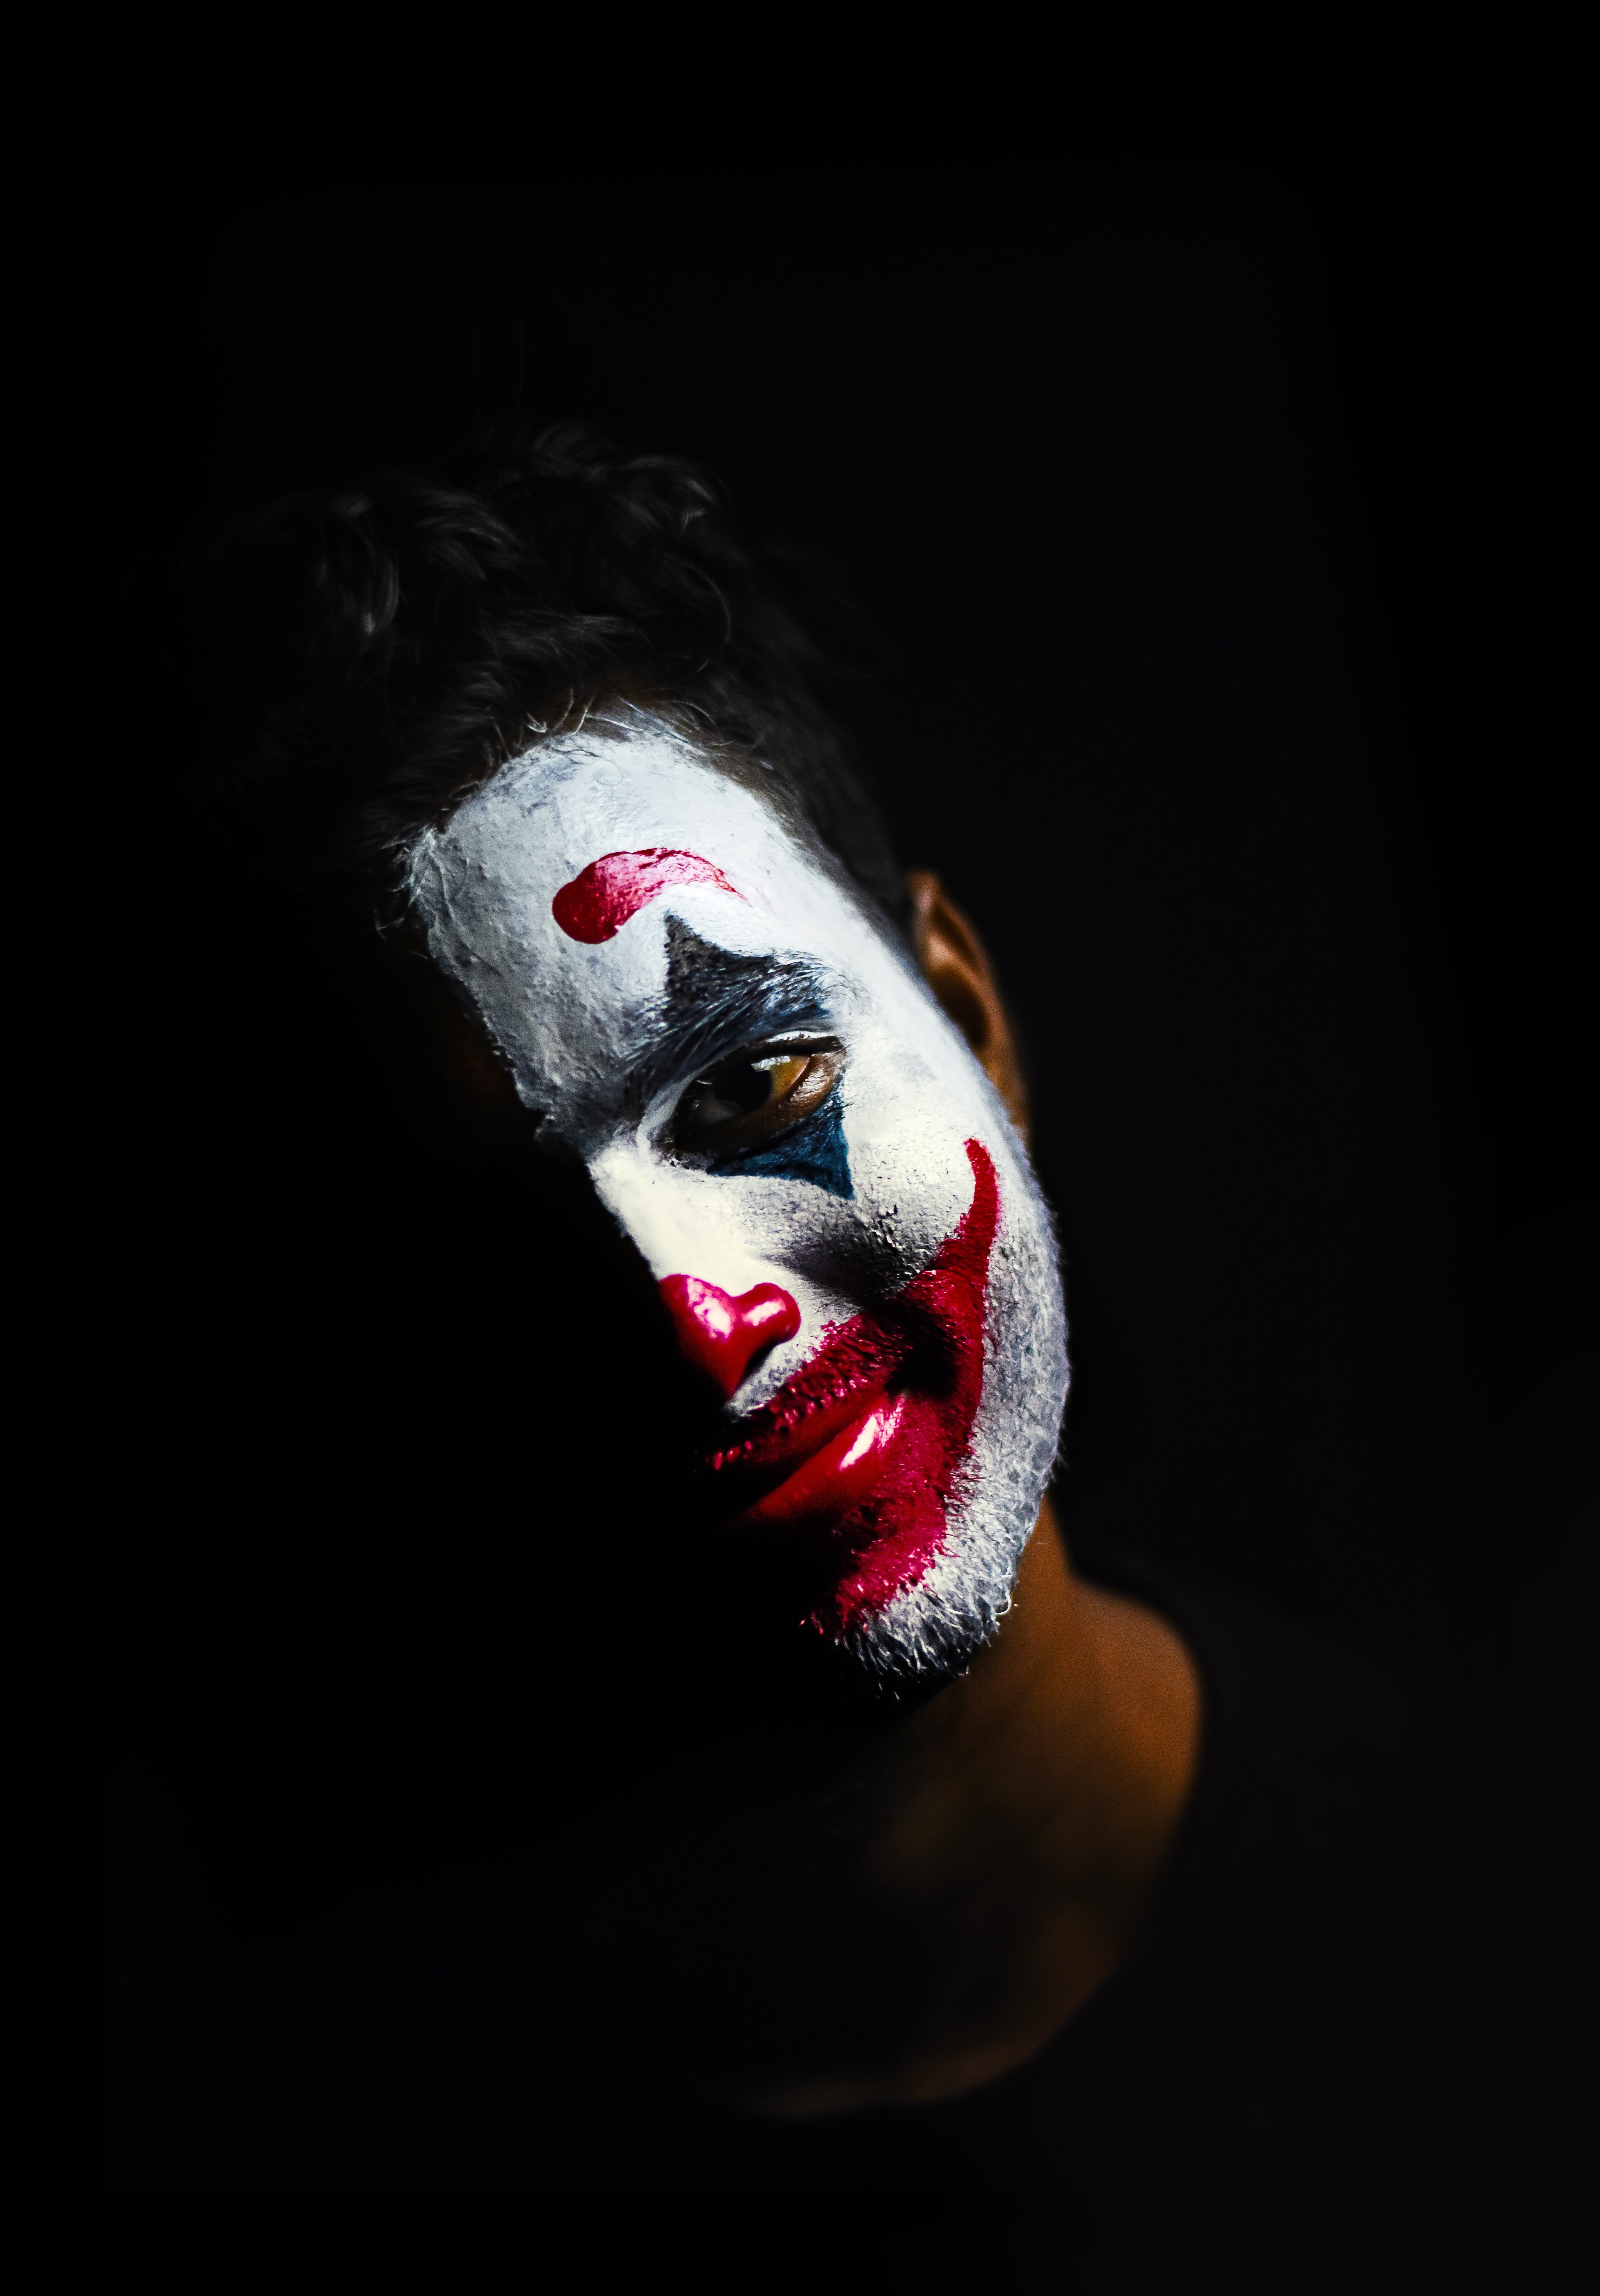 A figure wearing clown makeup is pictured against a black background.